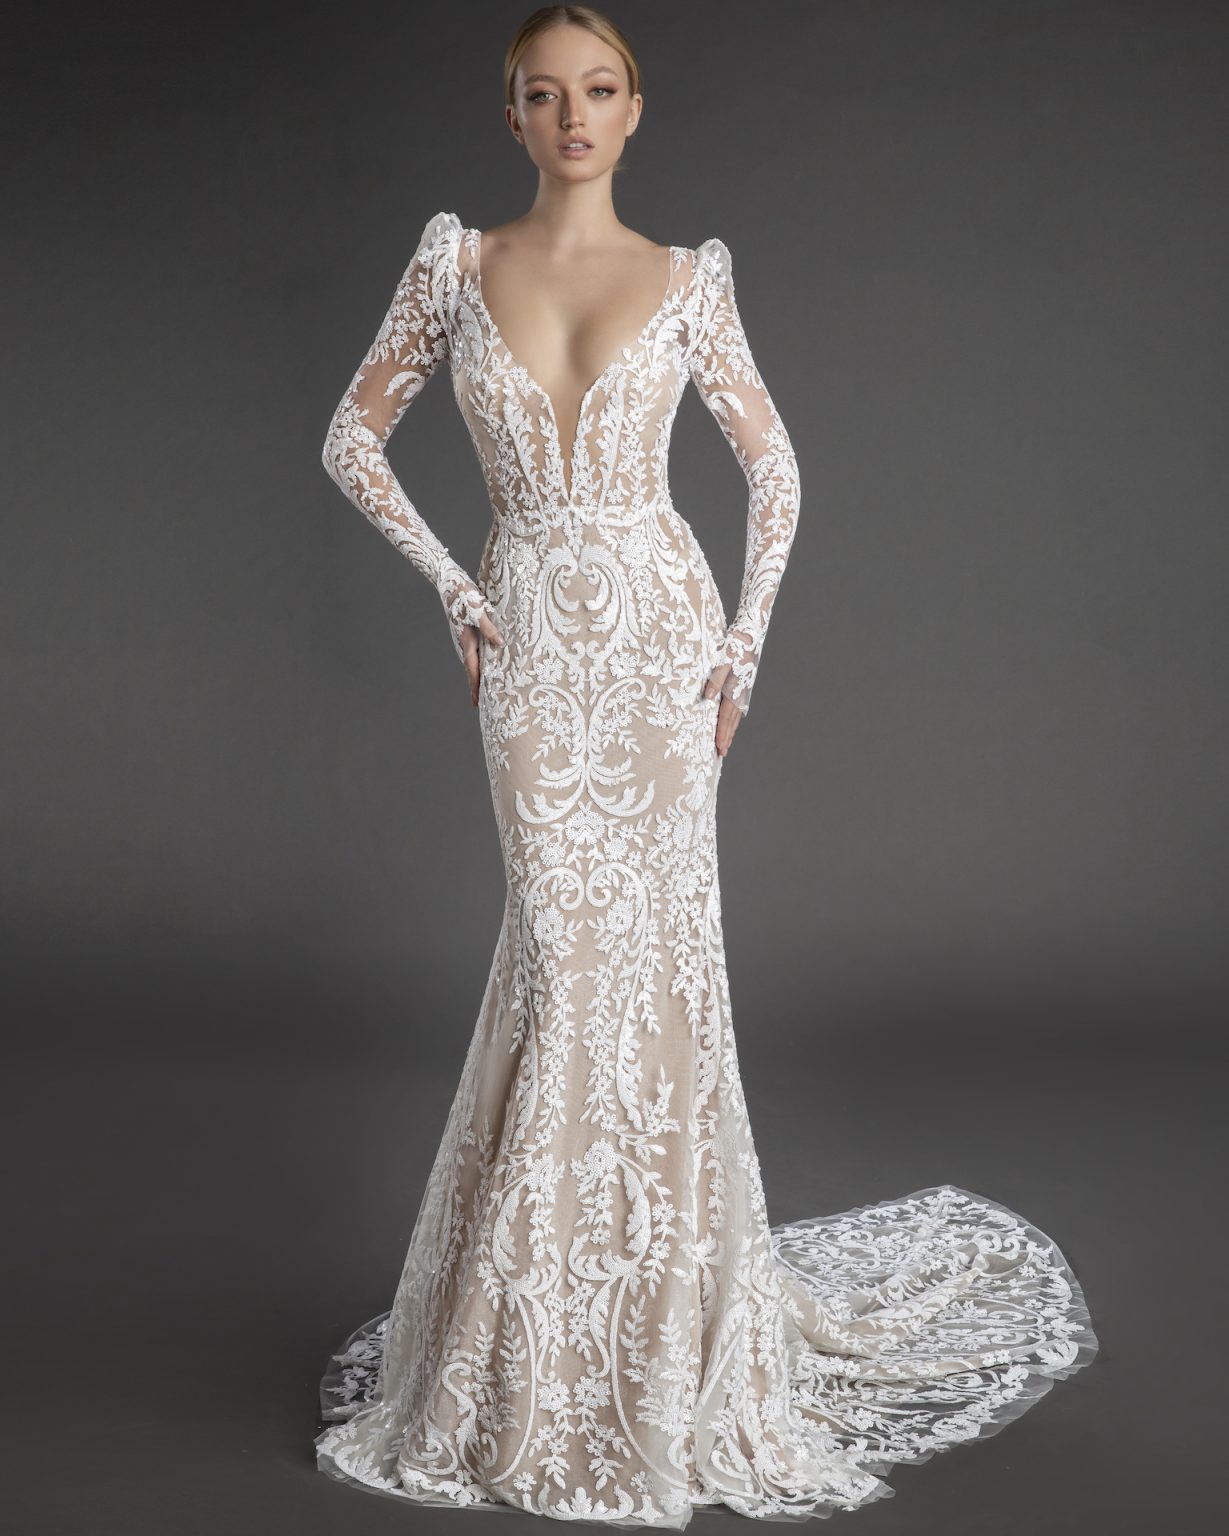 All Over Lace Long Puff Sleeve Sheath Wedding Dress With Plunging V Neckline Kleinfeld Bridal 2288